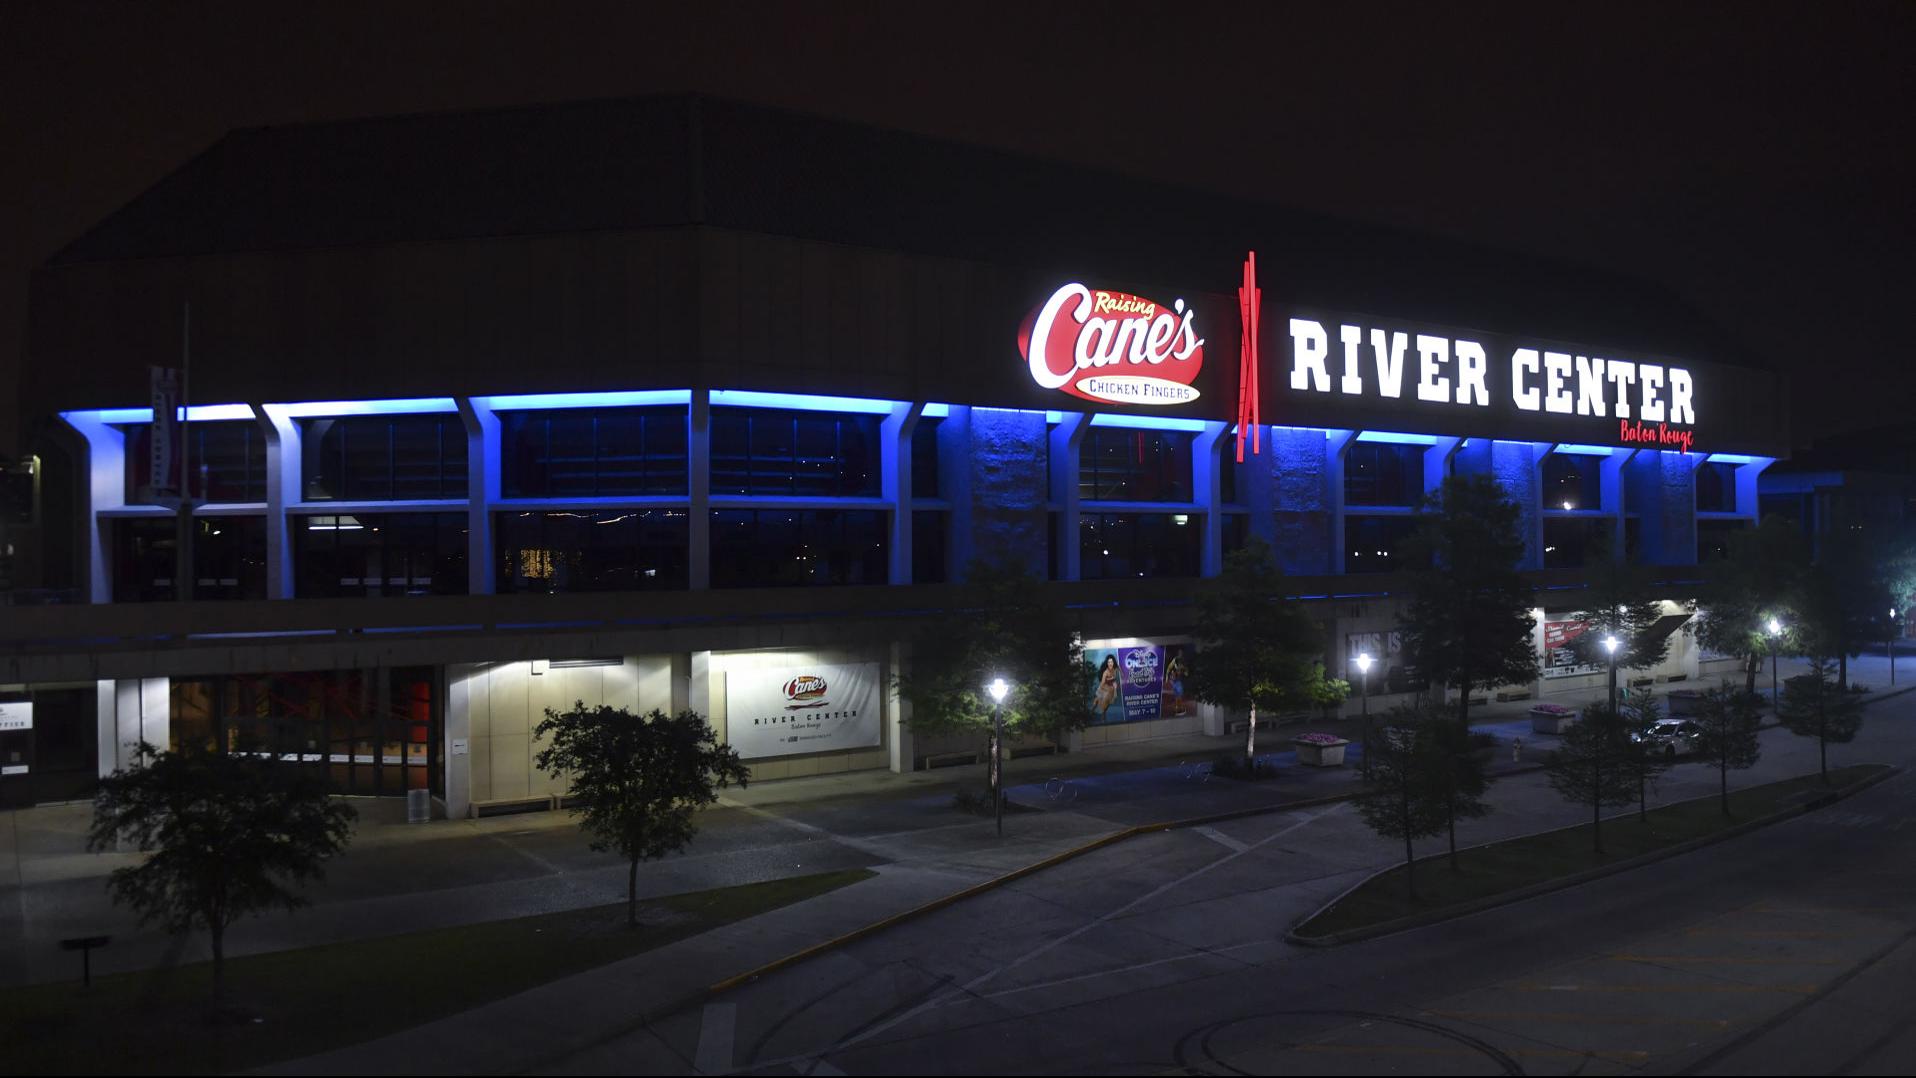 Raising Cane's River Center Theatre Tickets & Seating Chart